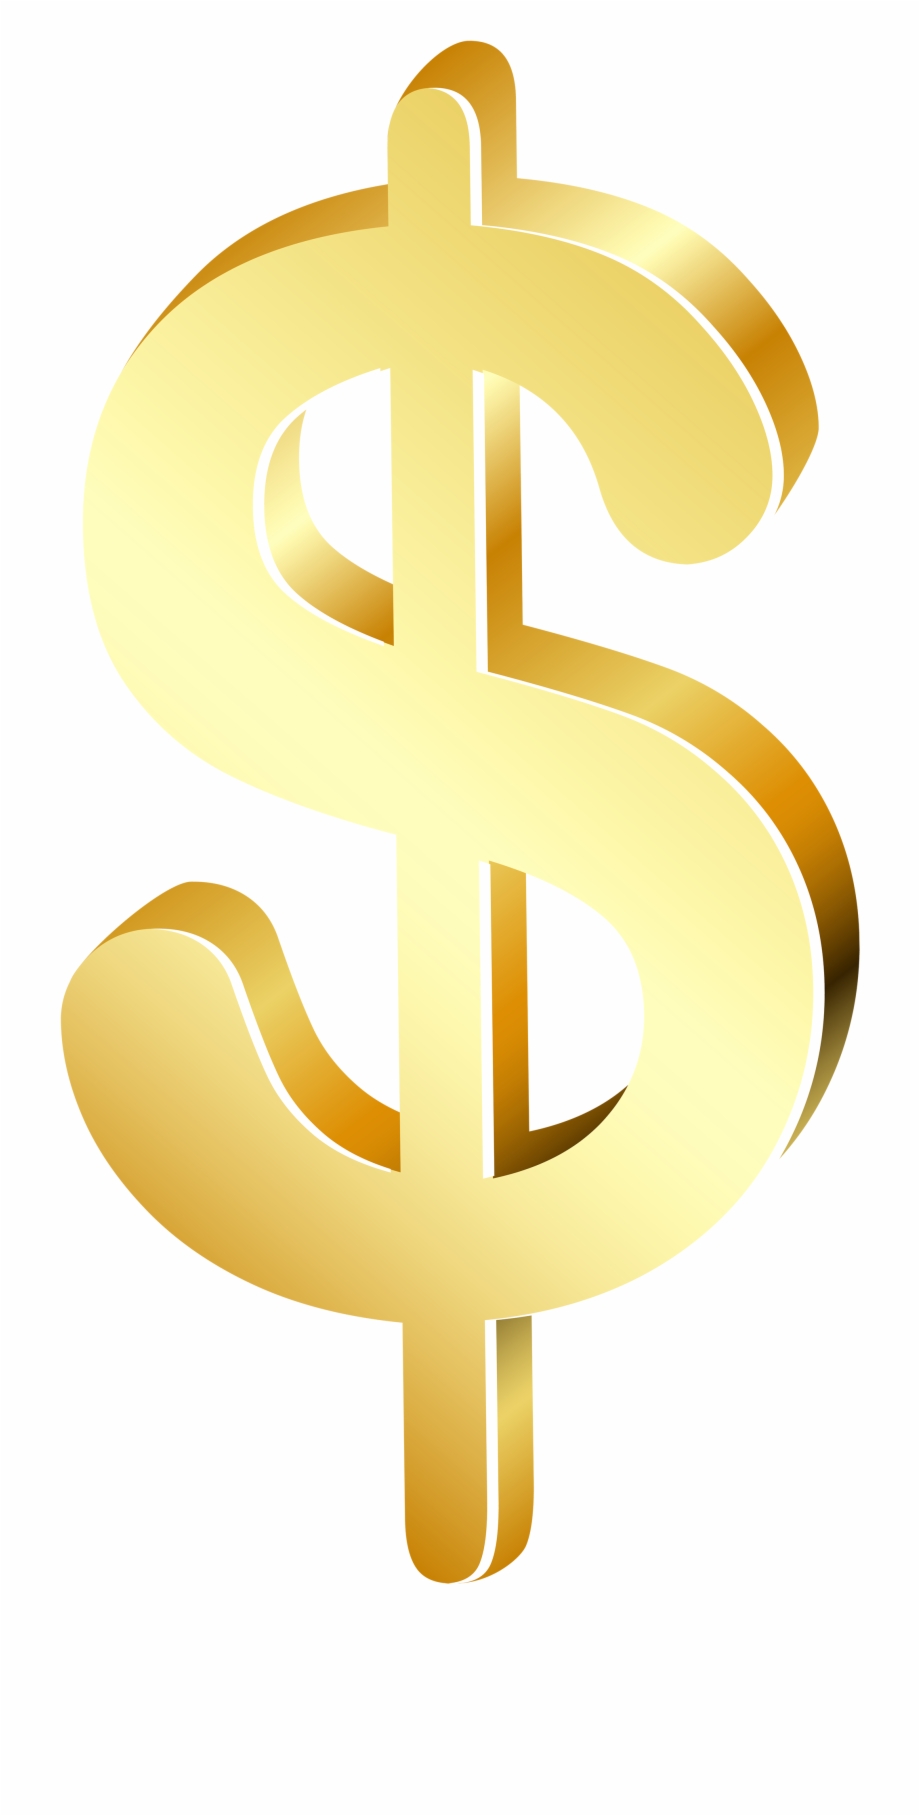 Australian dollar Dollar sign Currency symbol - quality png download ...